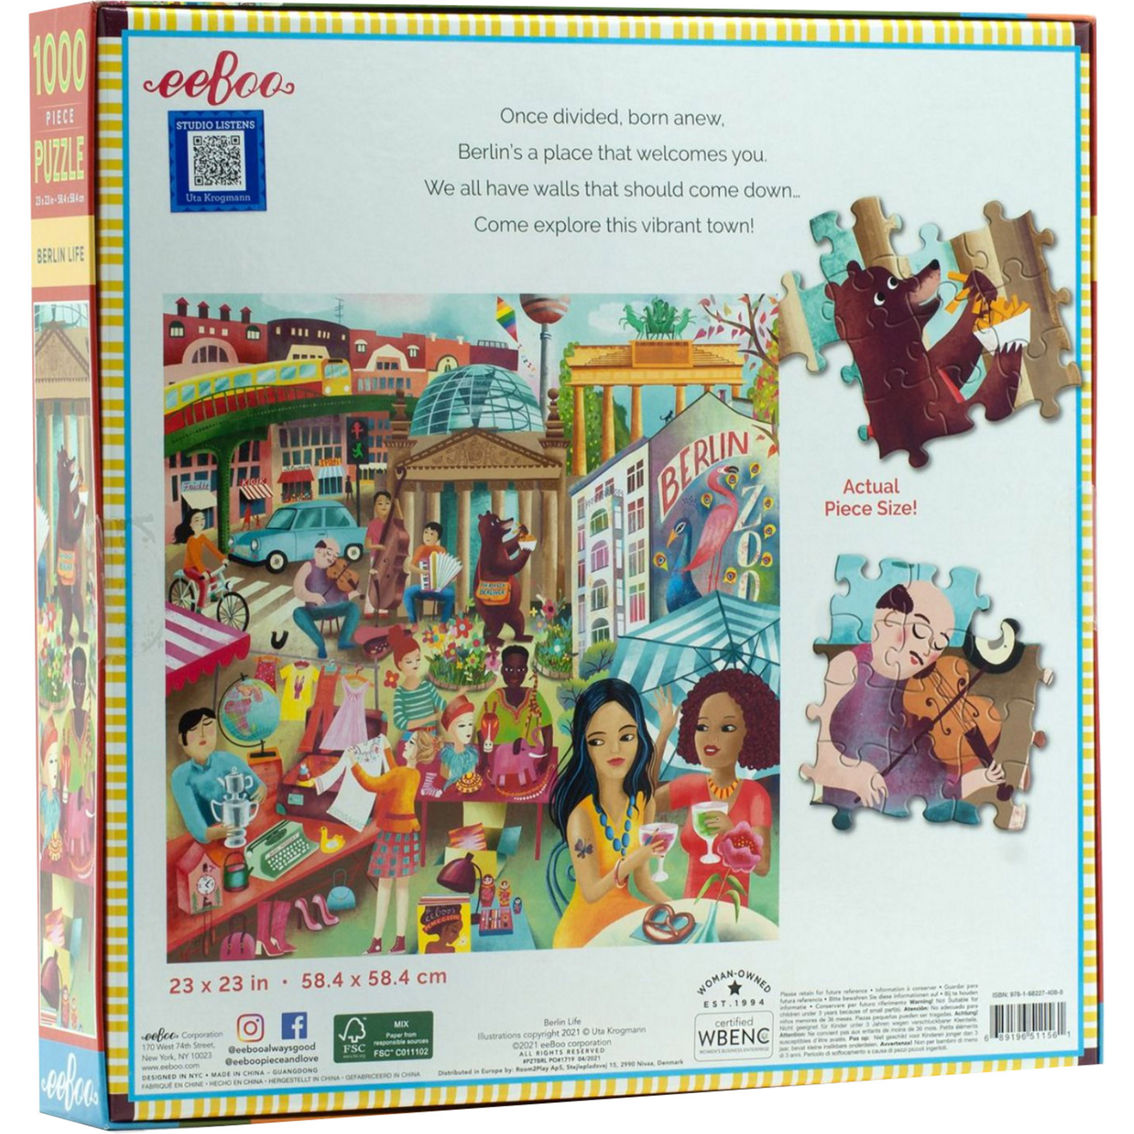 EeBoo Berlin Life 1,000 pc. Square Jigsaw Puzzle - Image 2 of 4